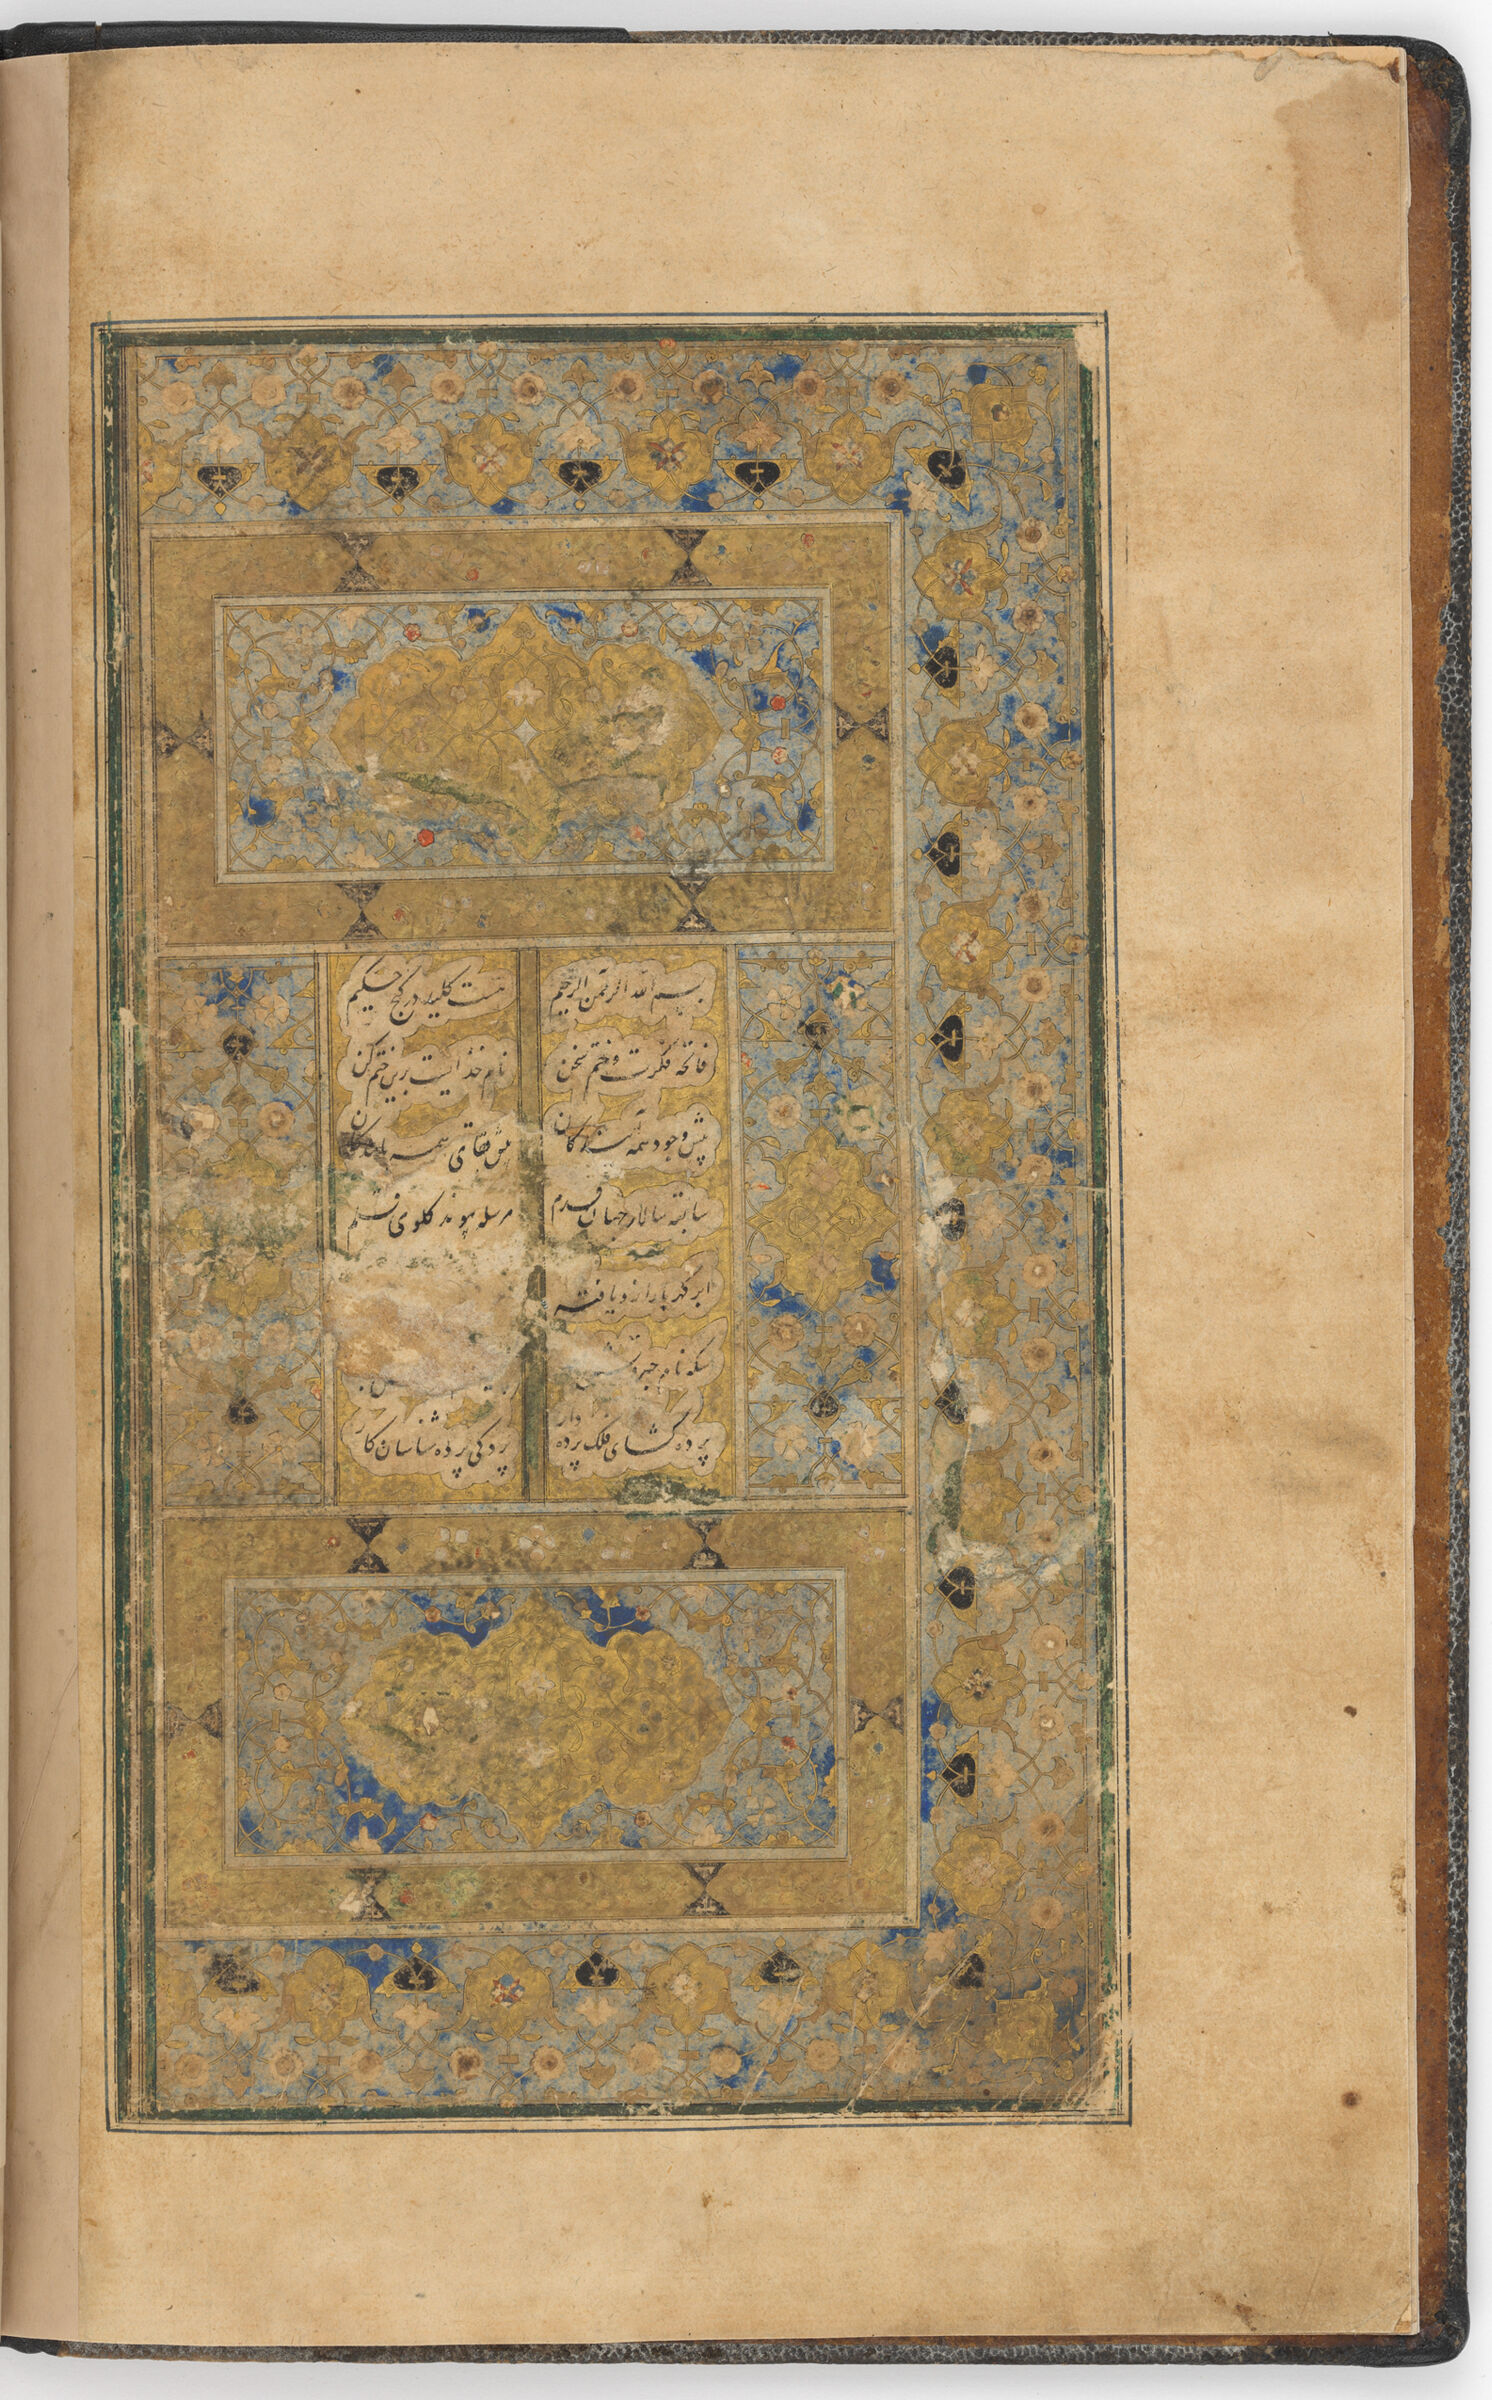 Acquisition Note Of Basile B. Corpi And The Right Half Of The Double-Page Illuminated Frontispiece (Acquisition Note Of Basile B. Corpi Recto  And Illumination Verso Of Folio 2) From A Manuscript Of The Khamsa By Nizami